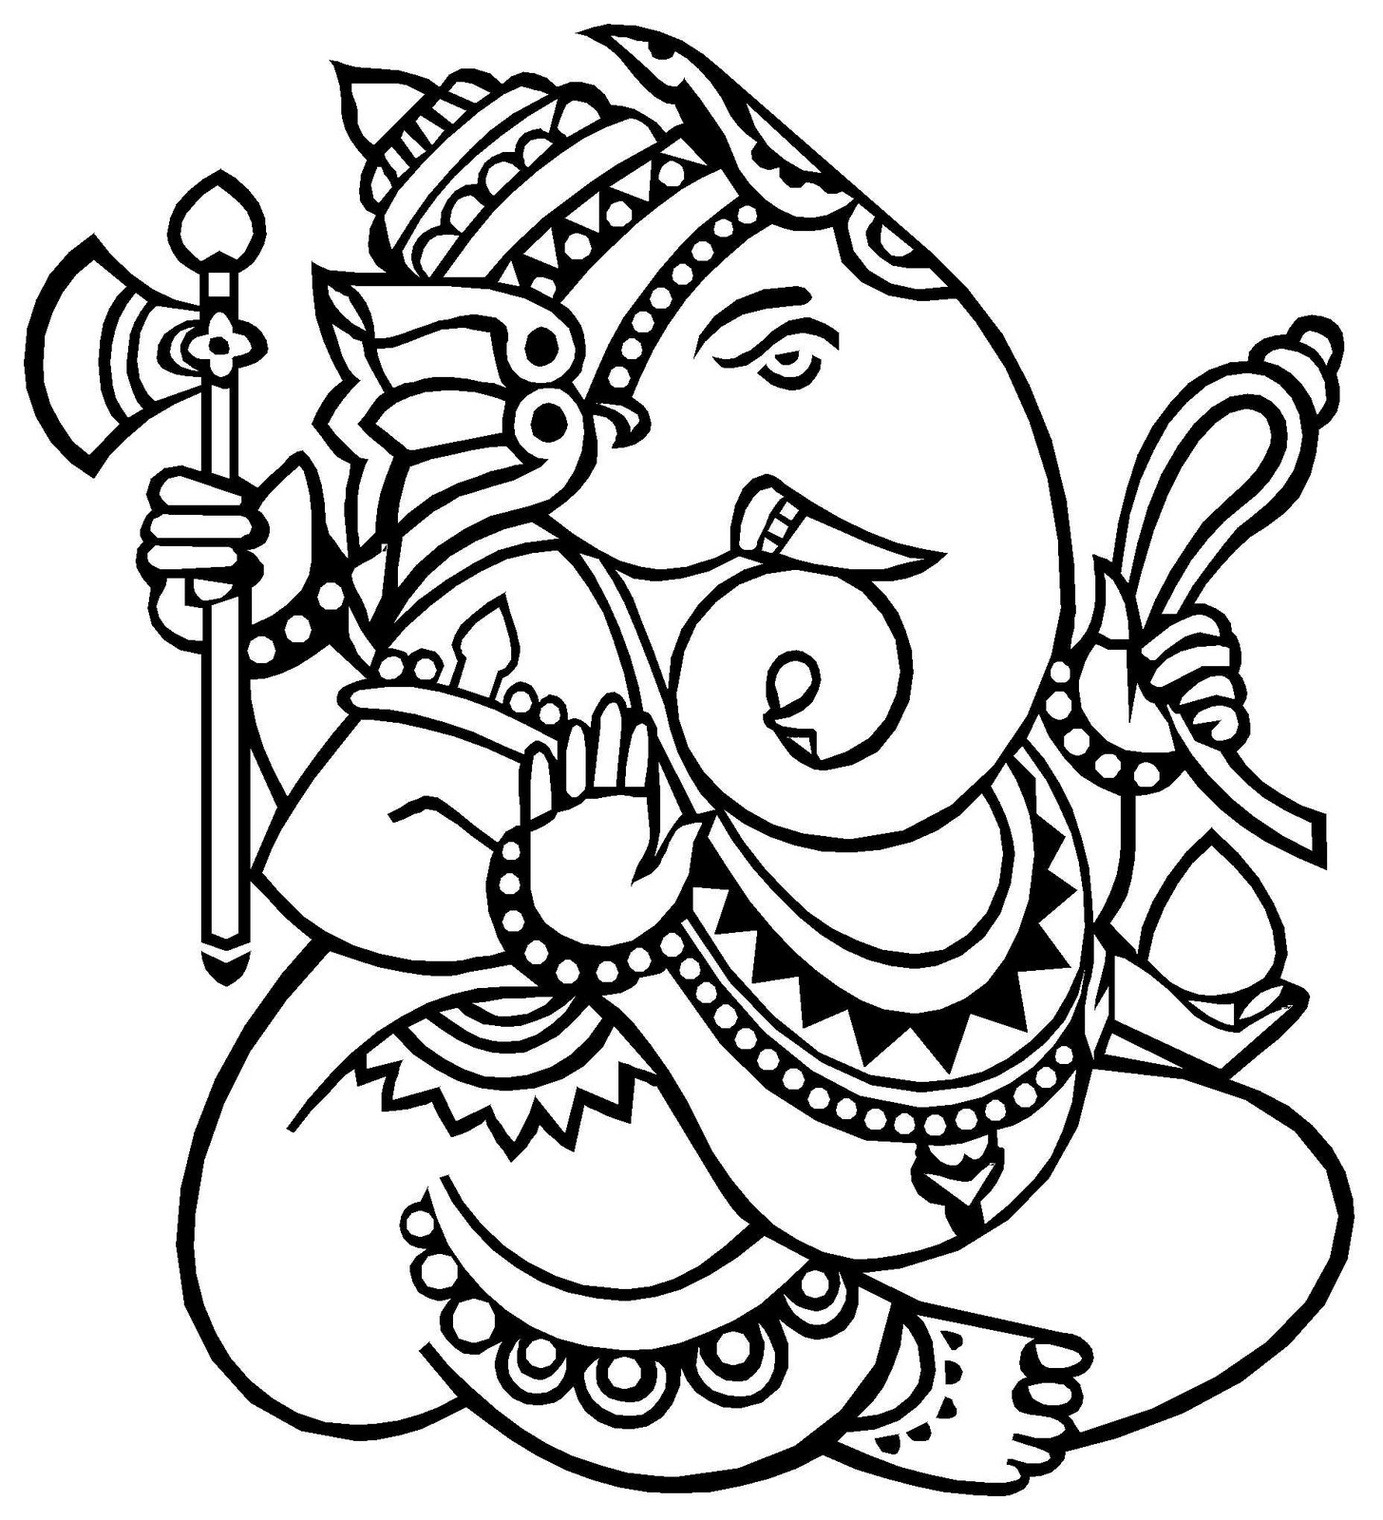 Ganesh Images Clipart.